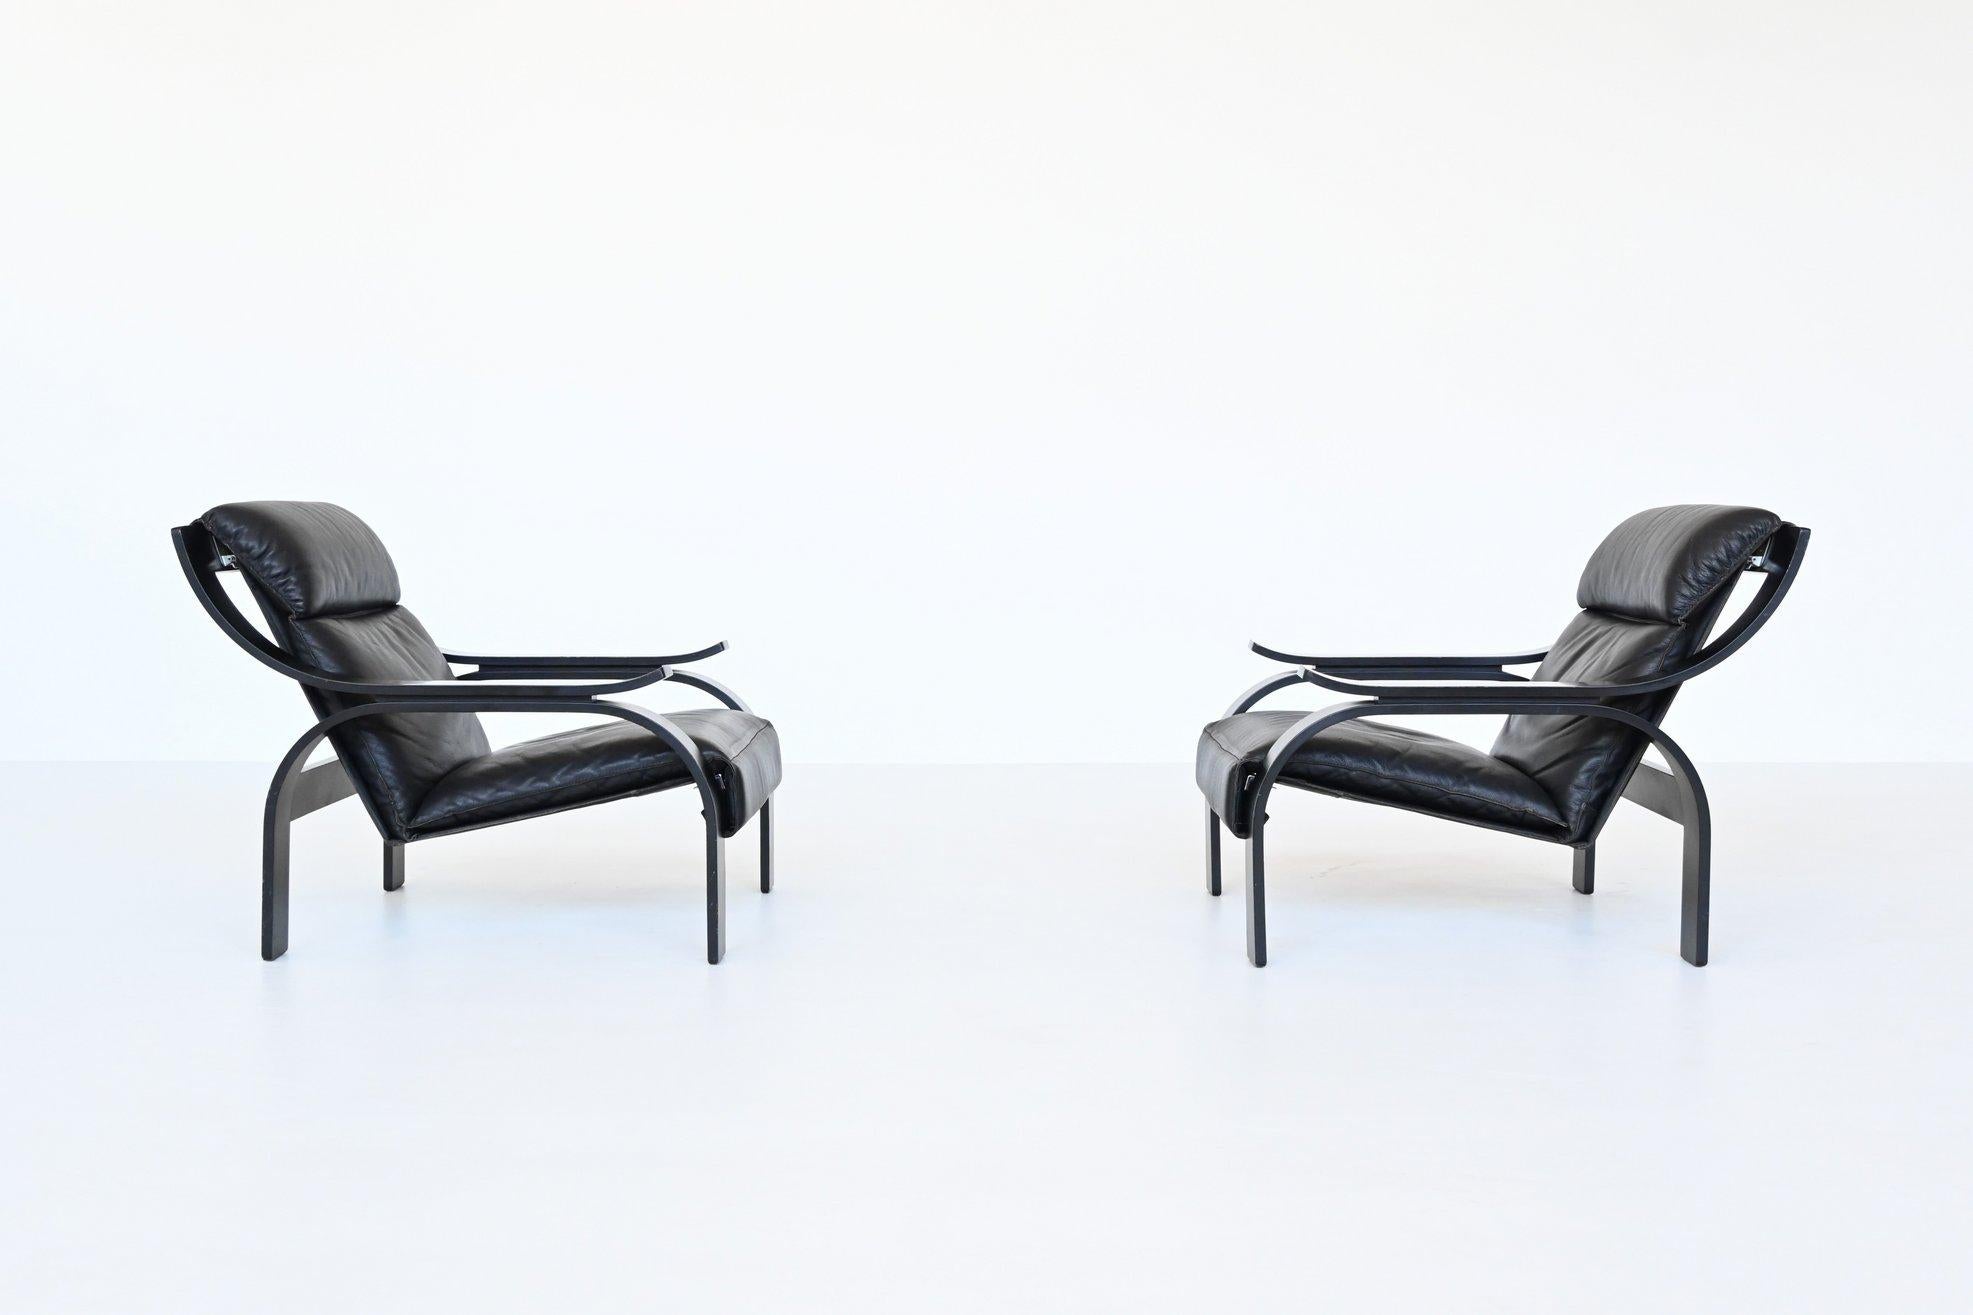 Iconic pair of Woodline lounge chairs designed by Marco Zanuso for Arflex, Italy 1964. These fantastic shaped chairs feature a black lacquered plywood frame and the seat is covered with high quality black leather. The hanging seat construction is